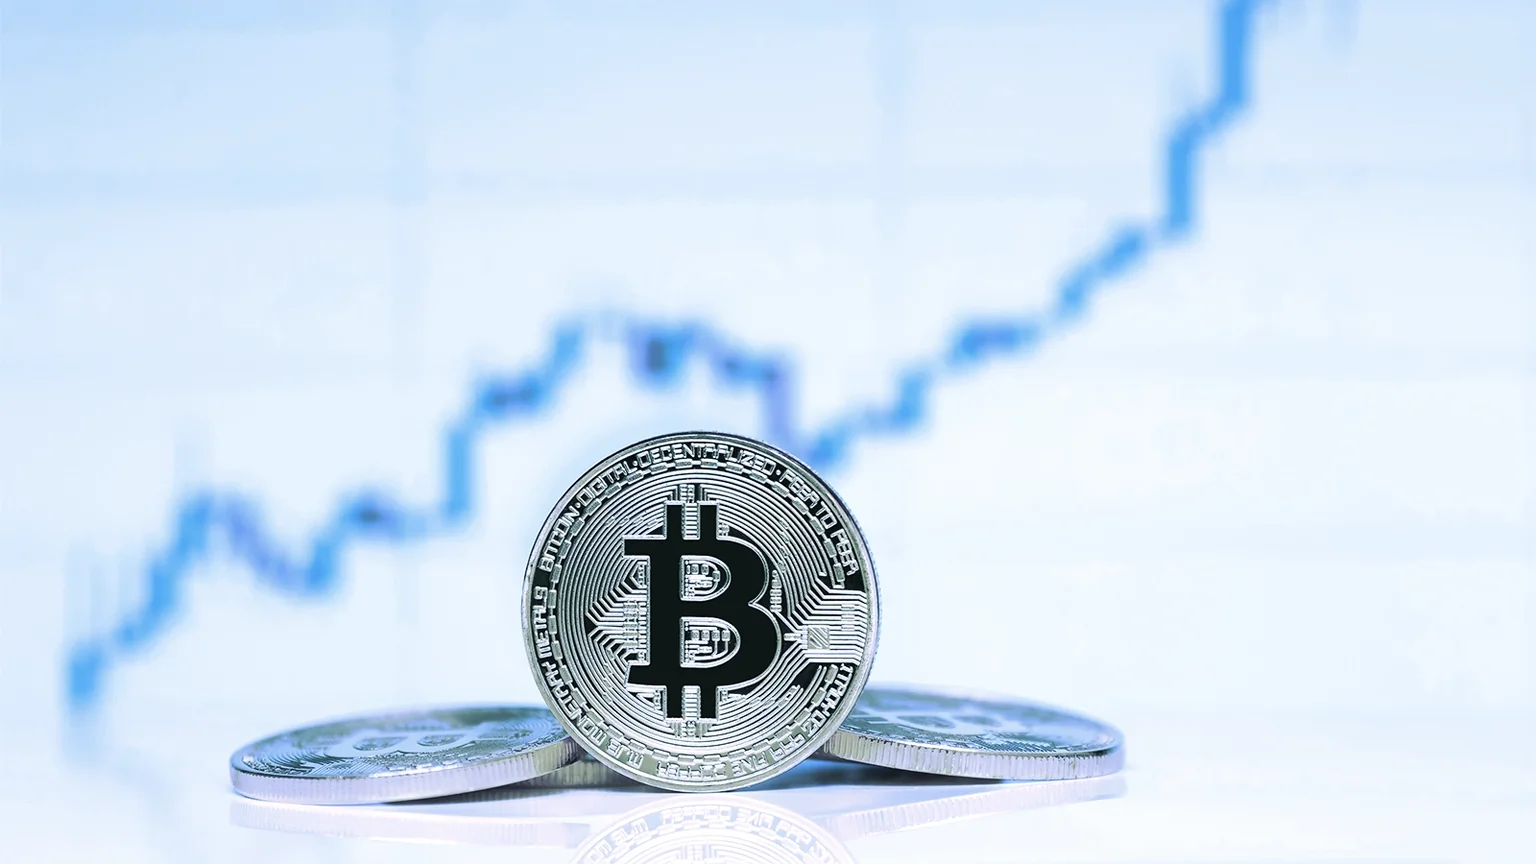 Bitcoin is the world's largest cryptocurrency by market cap. IMAGE: Shutterstock